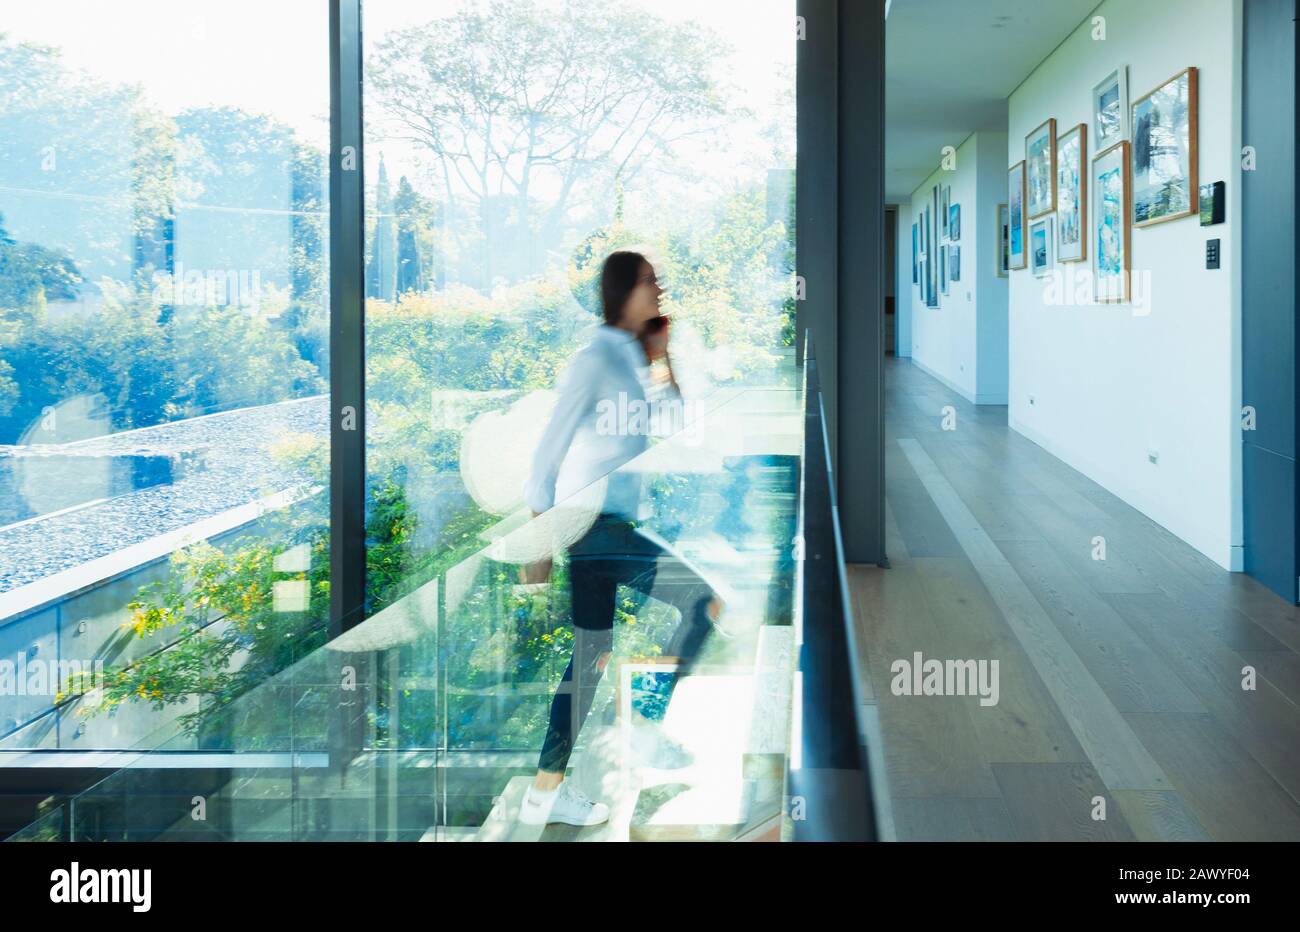 Woman ascending stairs in sunny modern, luxury home Stock Photo